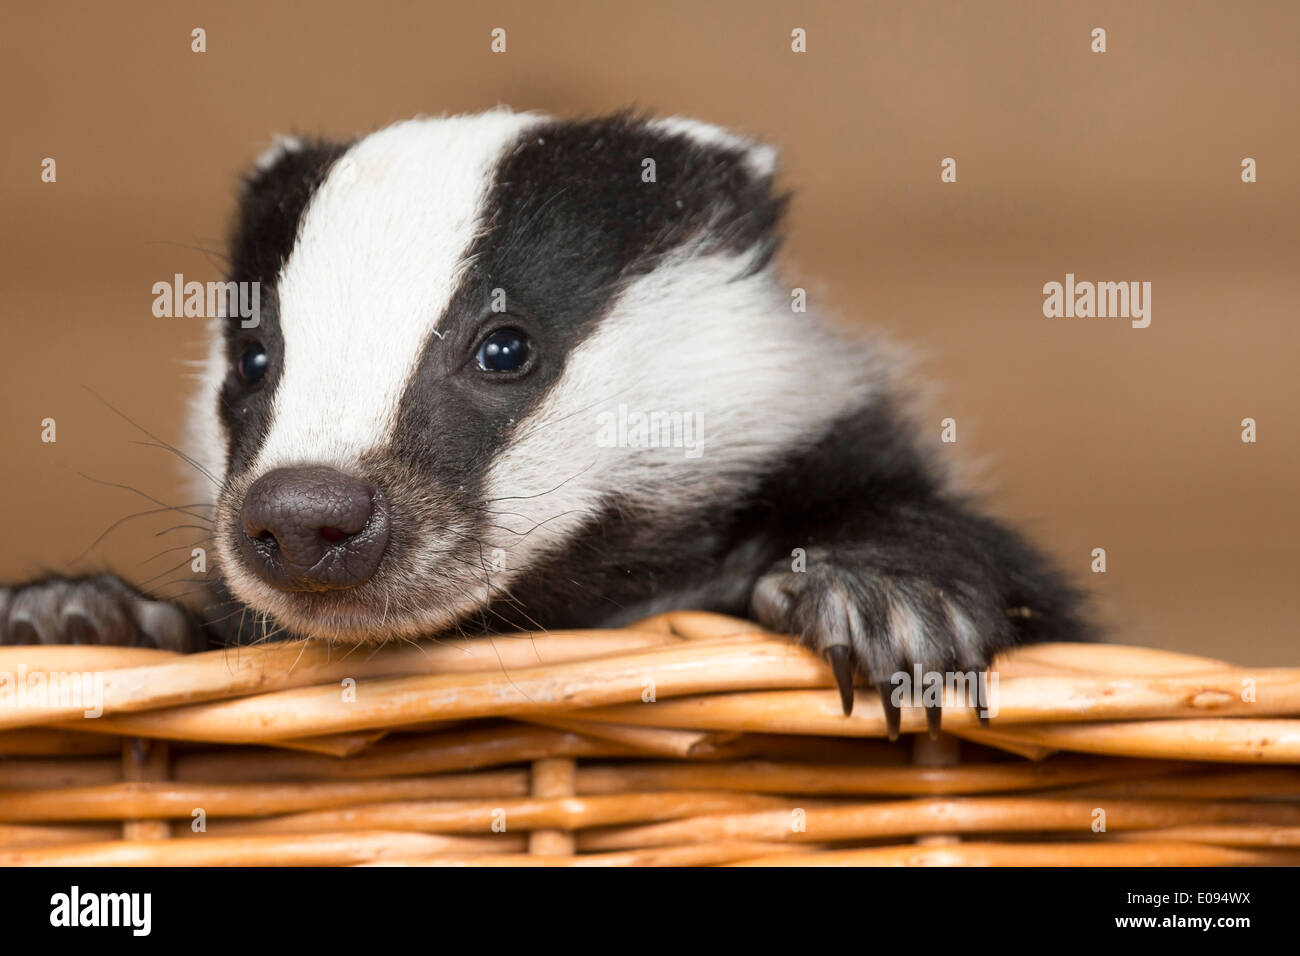 A baby badger found abandoned in a hedgerow next to it's parents that had been killed. Stock Photo